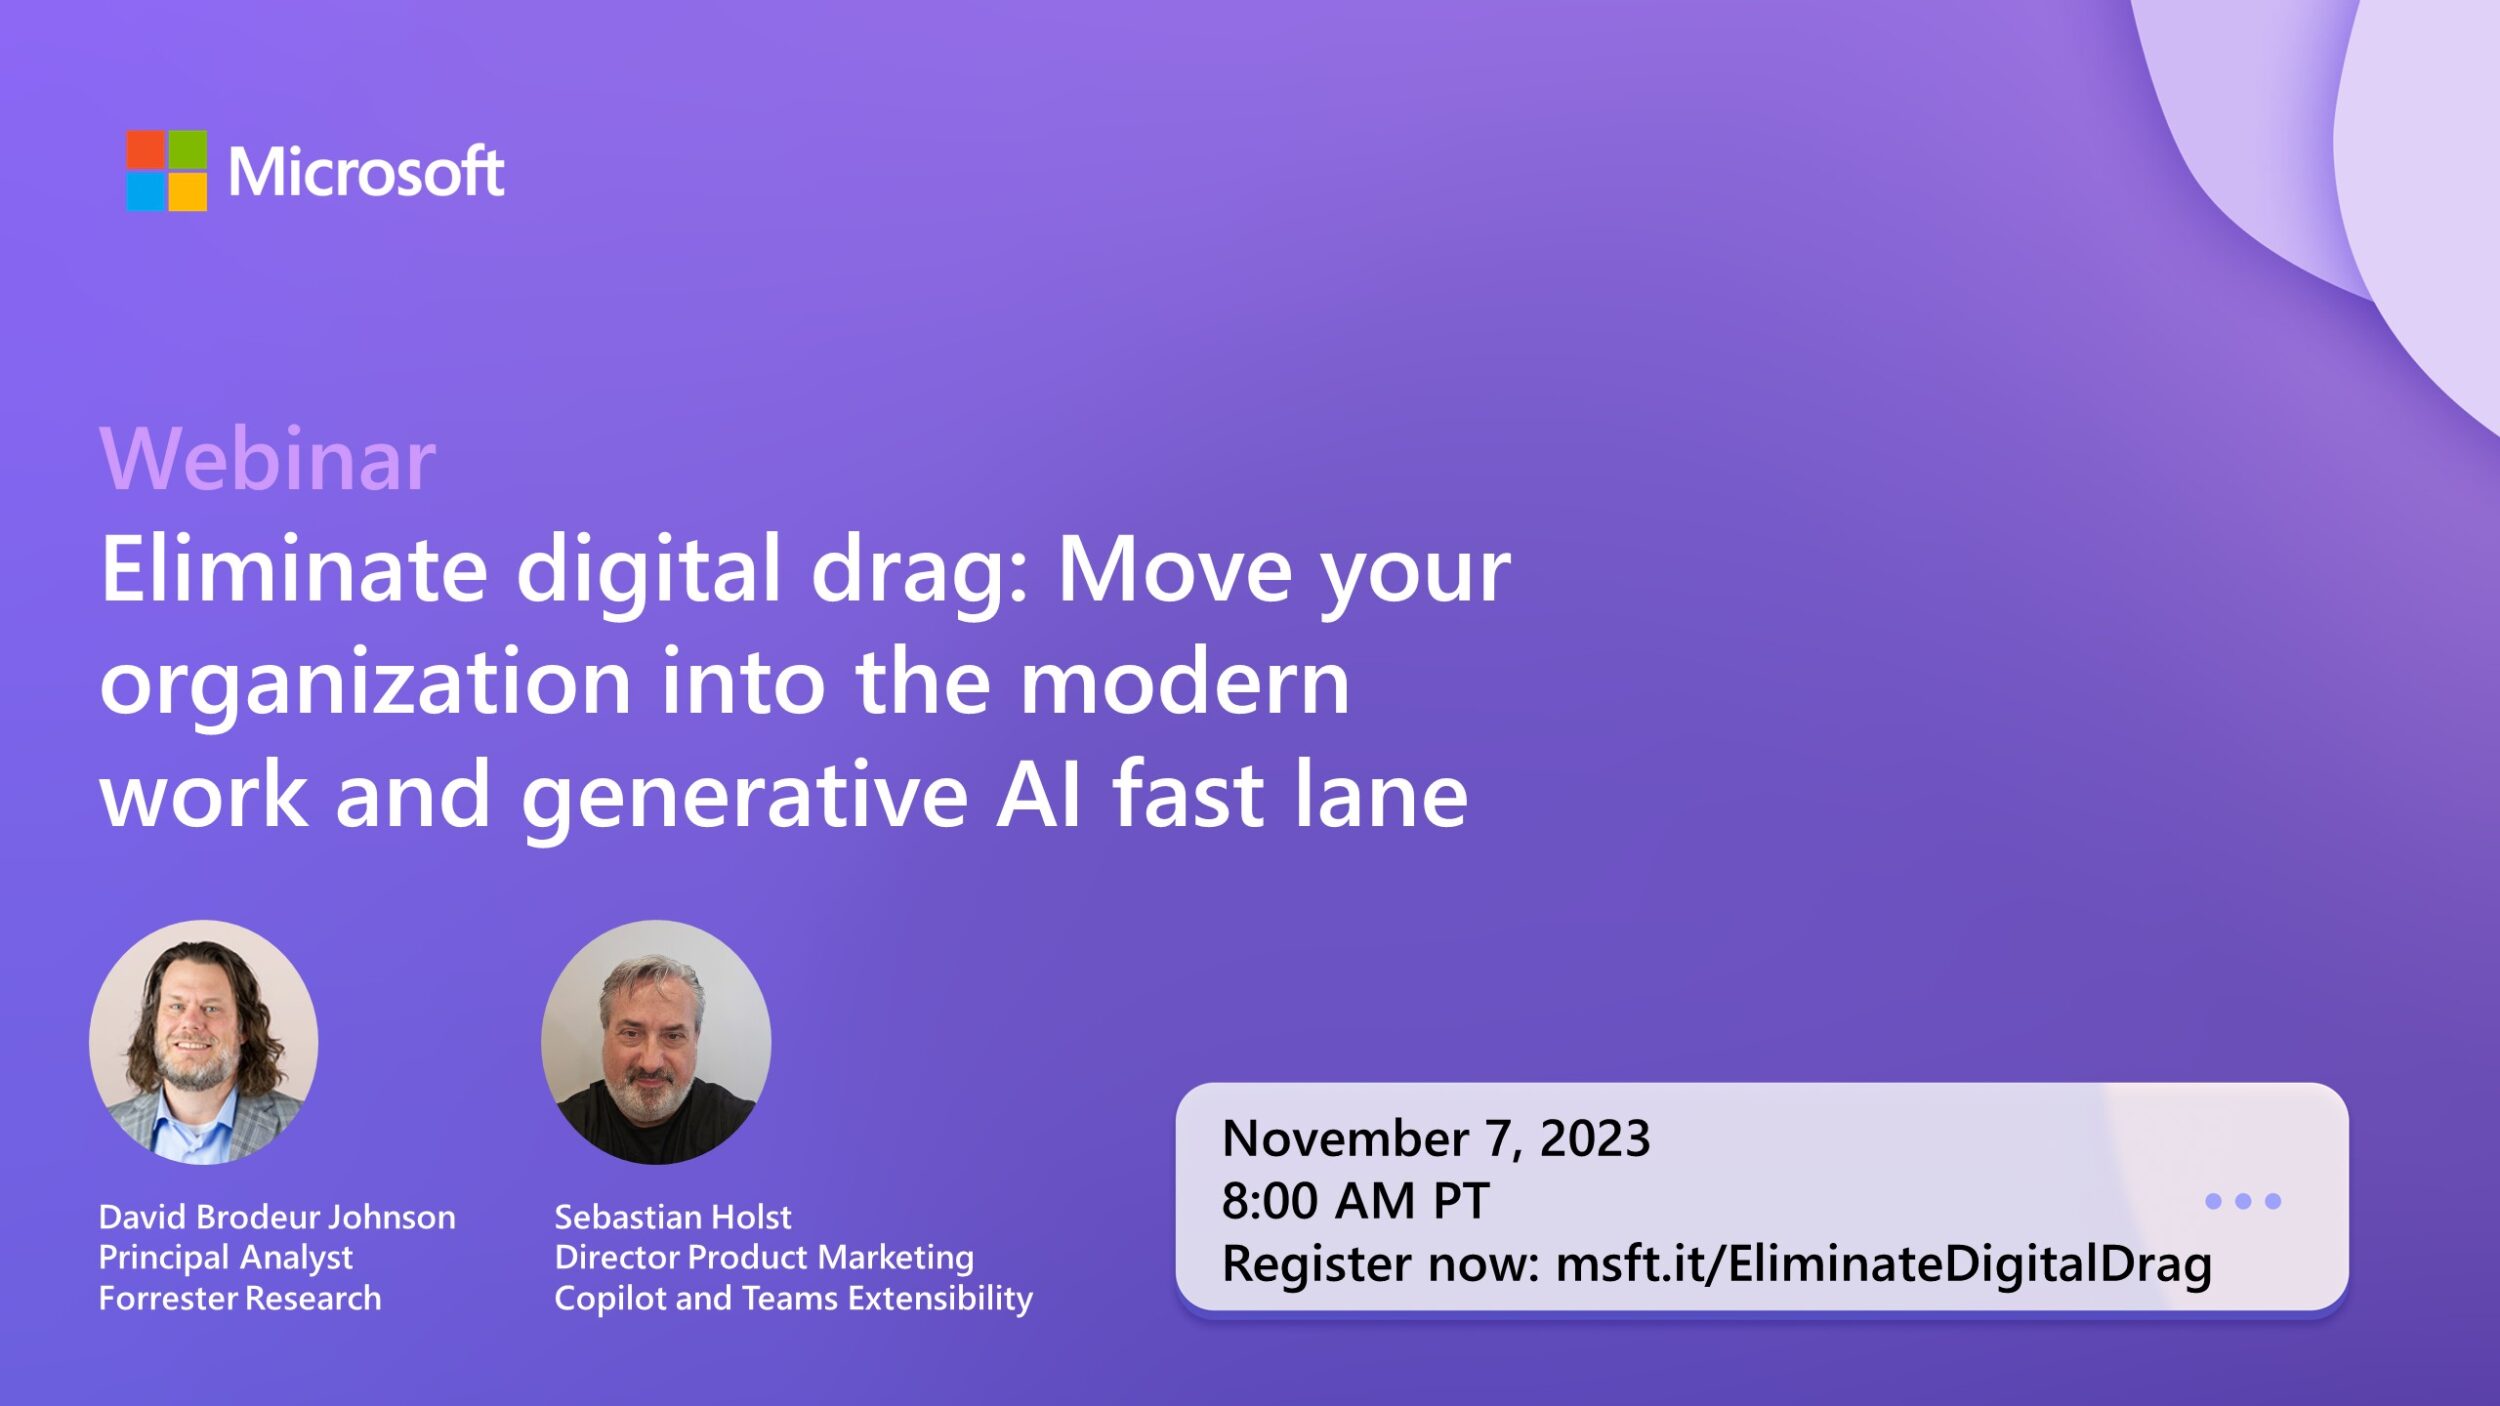 Eliminate digital drag: Move your organization into the modern work and generative AI fast lane